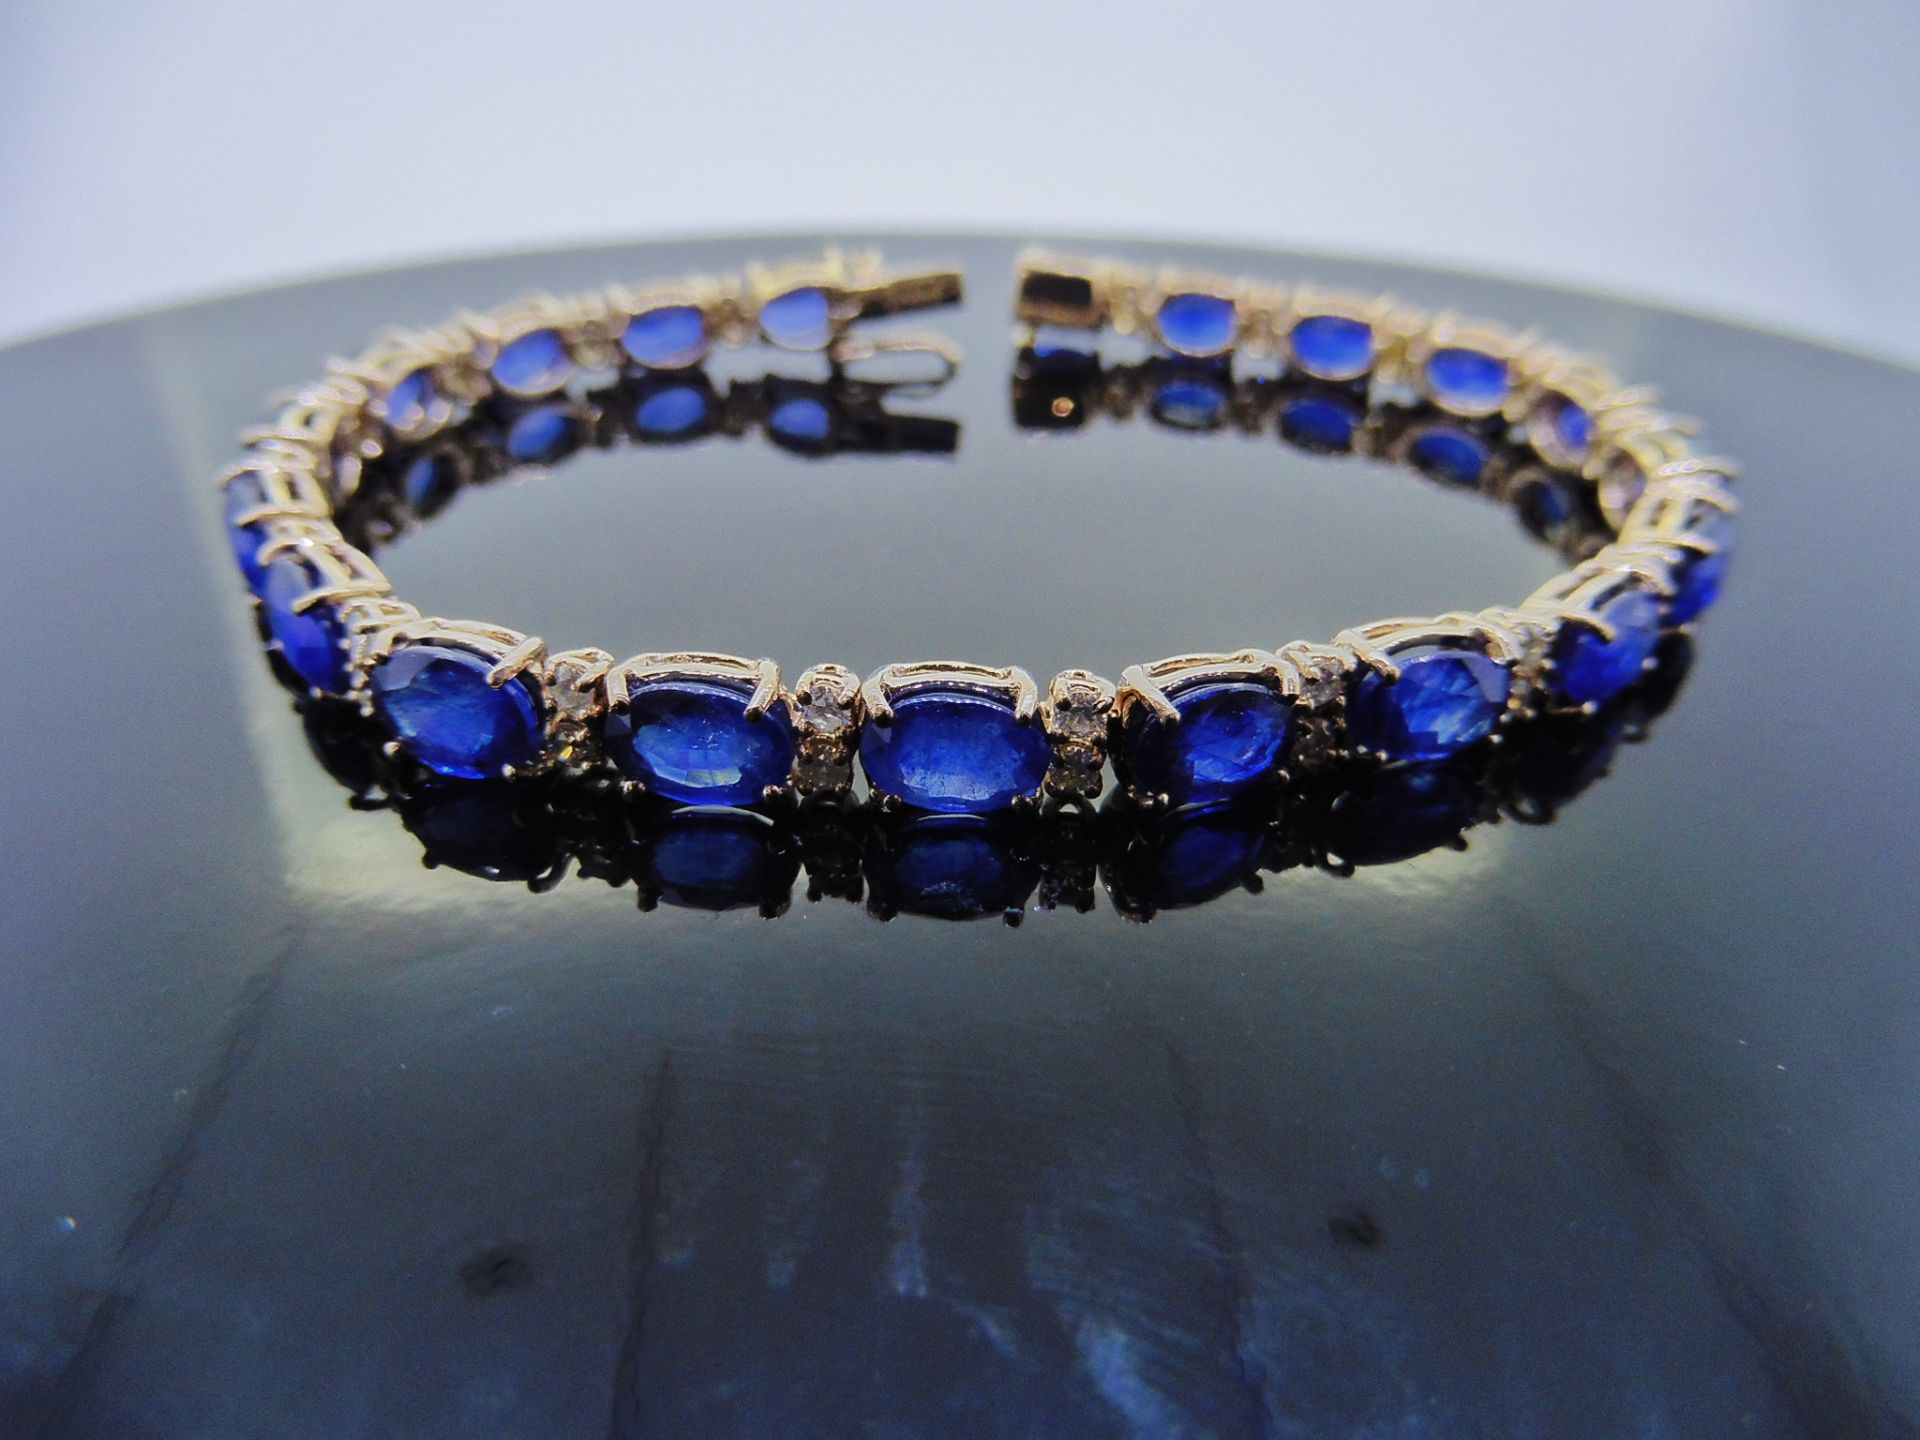 18ct white gold Sapphire and diamond bracelet. Set with 7 x 5mm oval cut treated sapphires, total